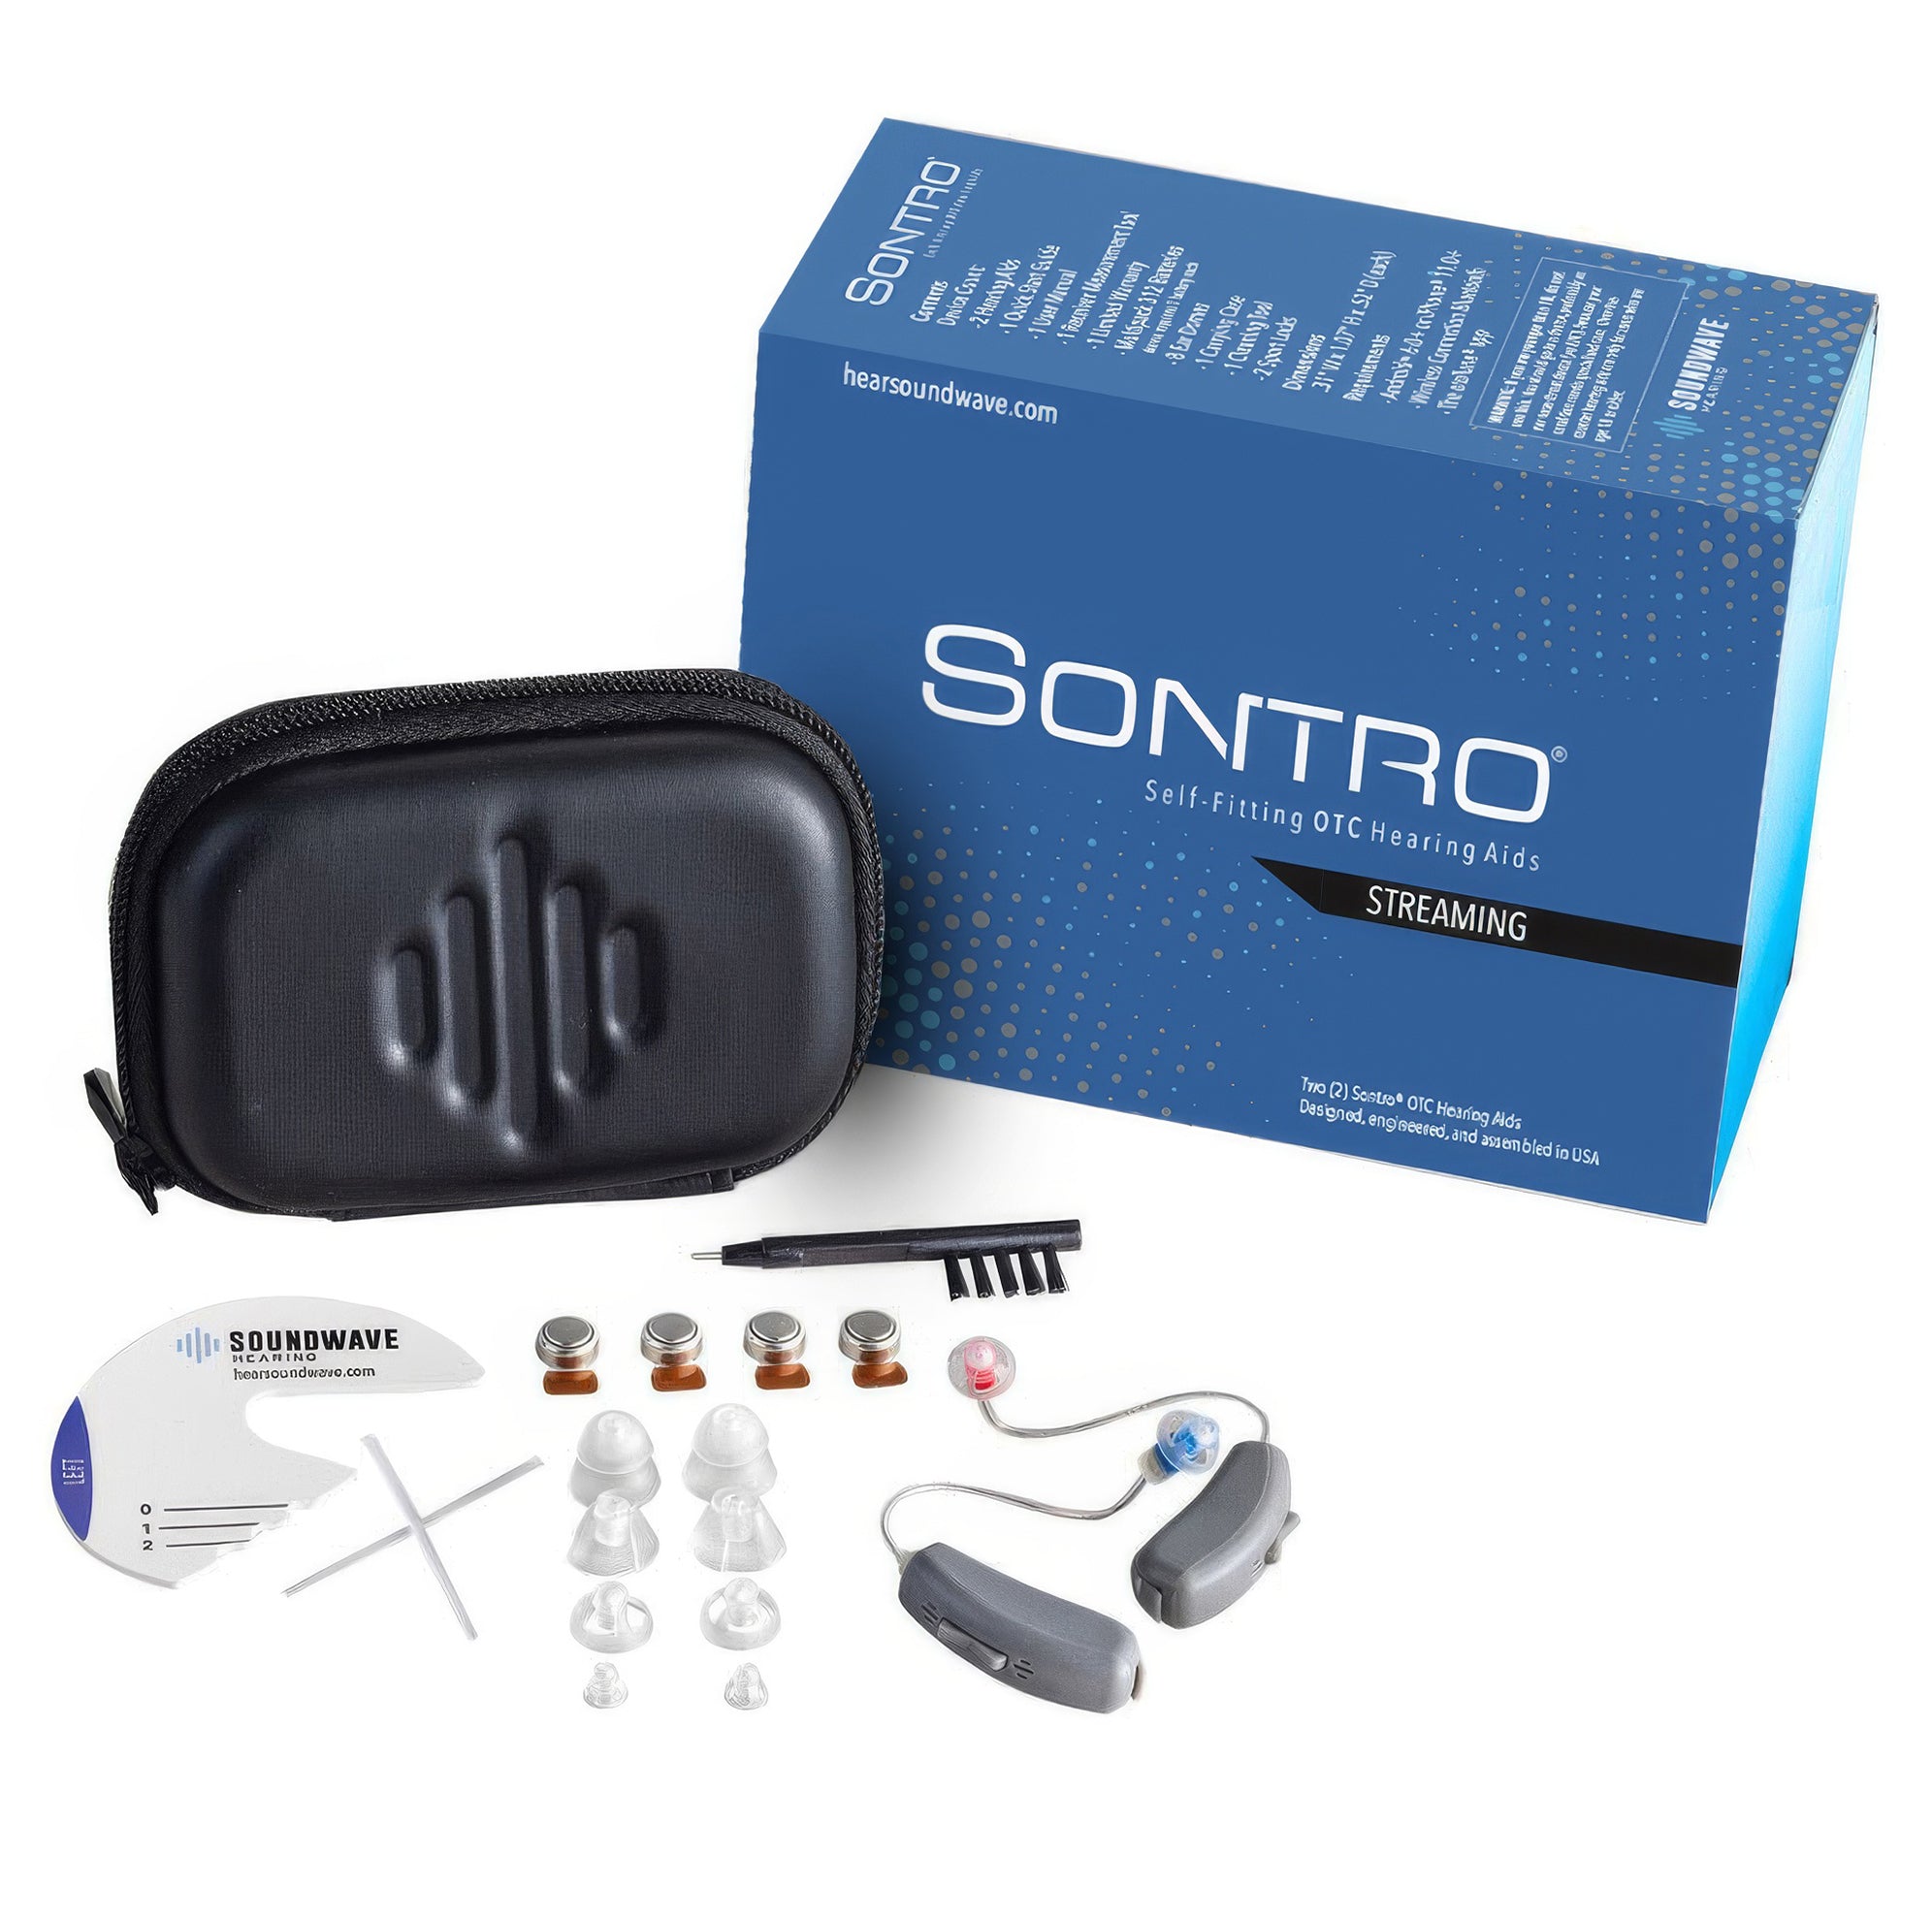 Sontro Self-Fitting OTC Hearing Aids Model AI-S Streaming Grey Packaging